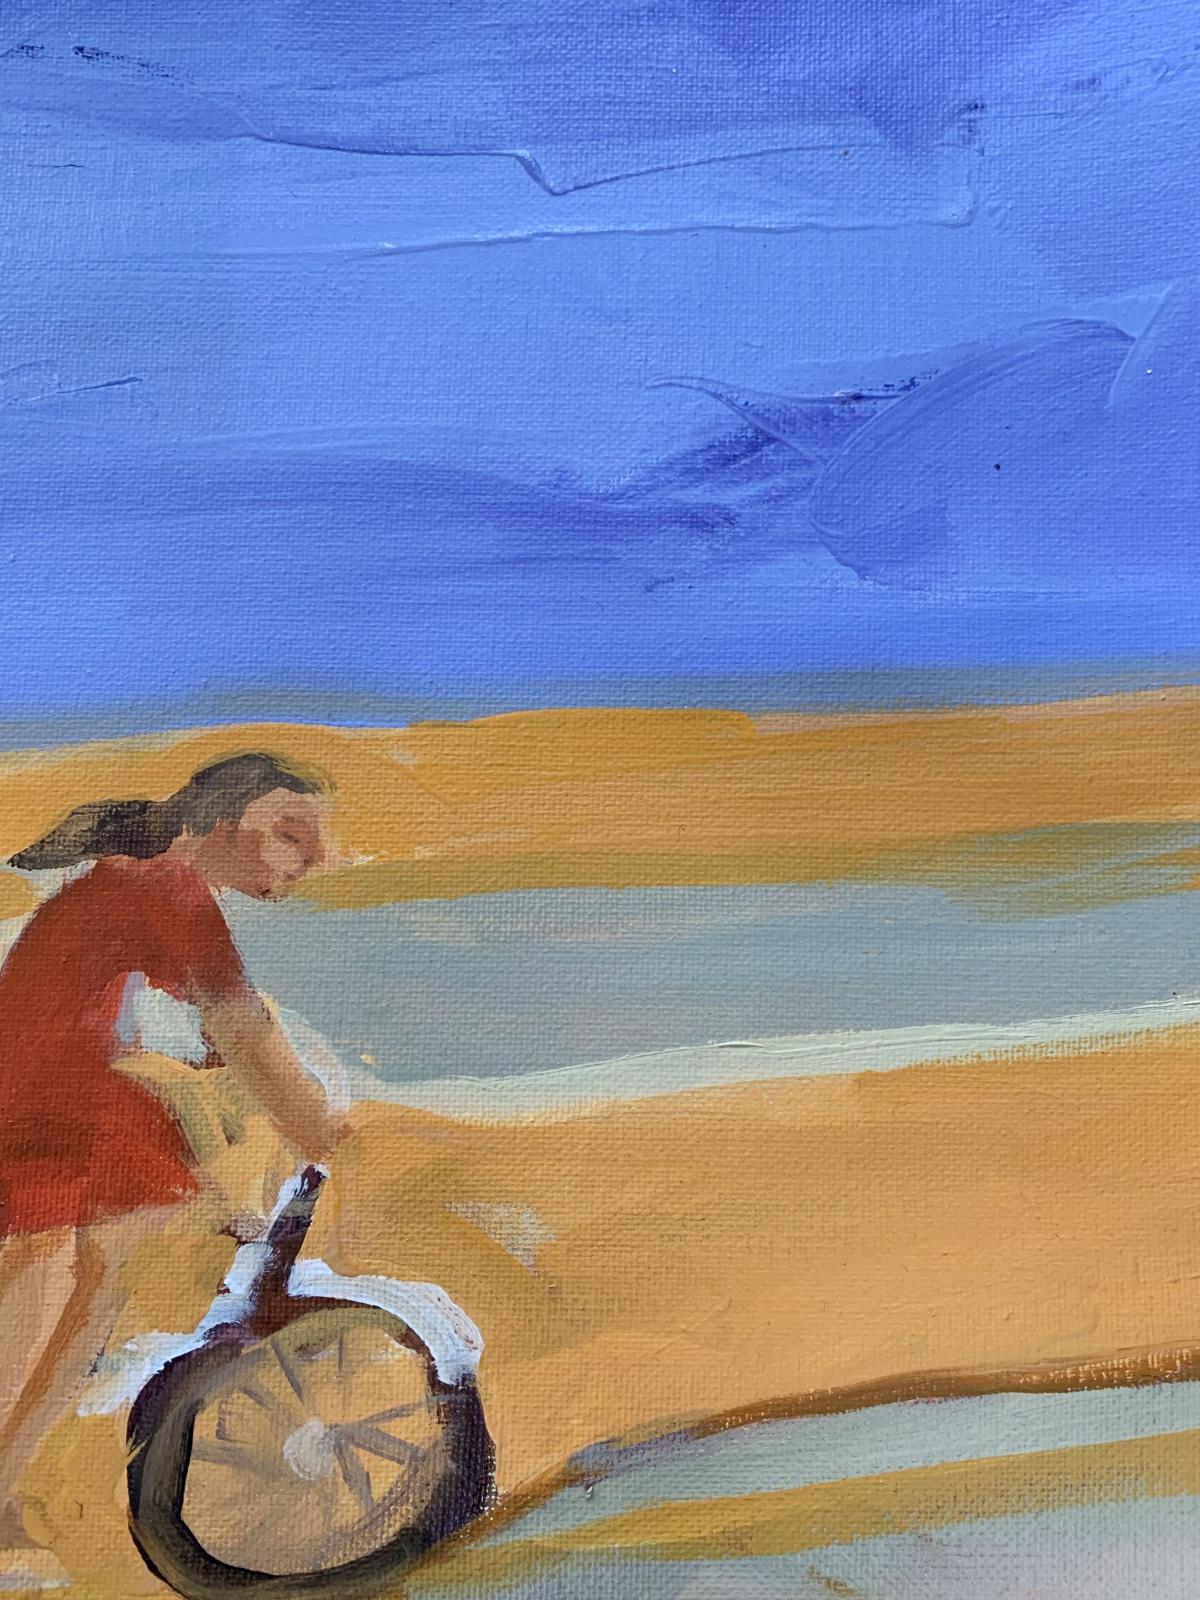 Bicycles - XXI century, Contemporary Figurative Oil Painting, Vibrant Colors - Gray Figurative Painting by Monika Rossa